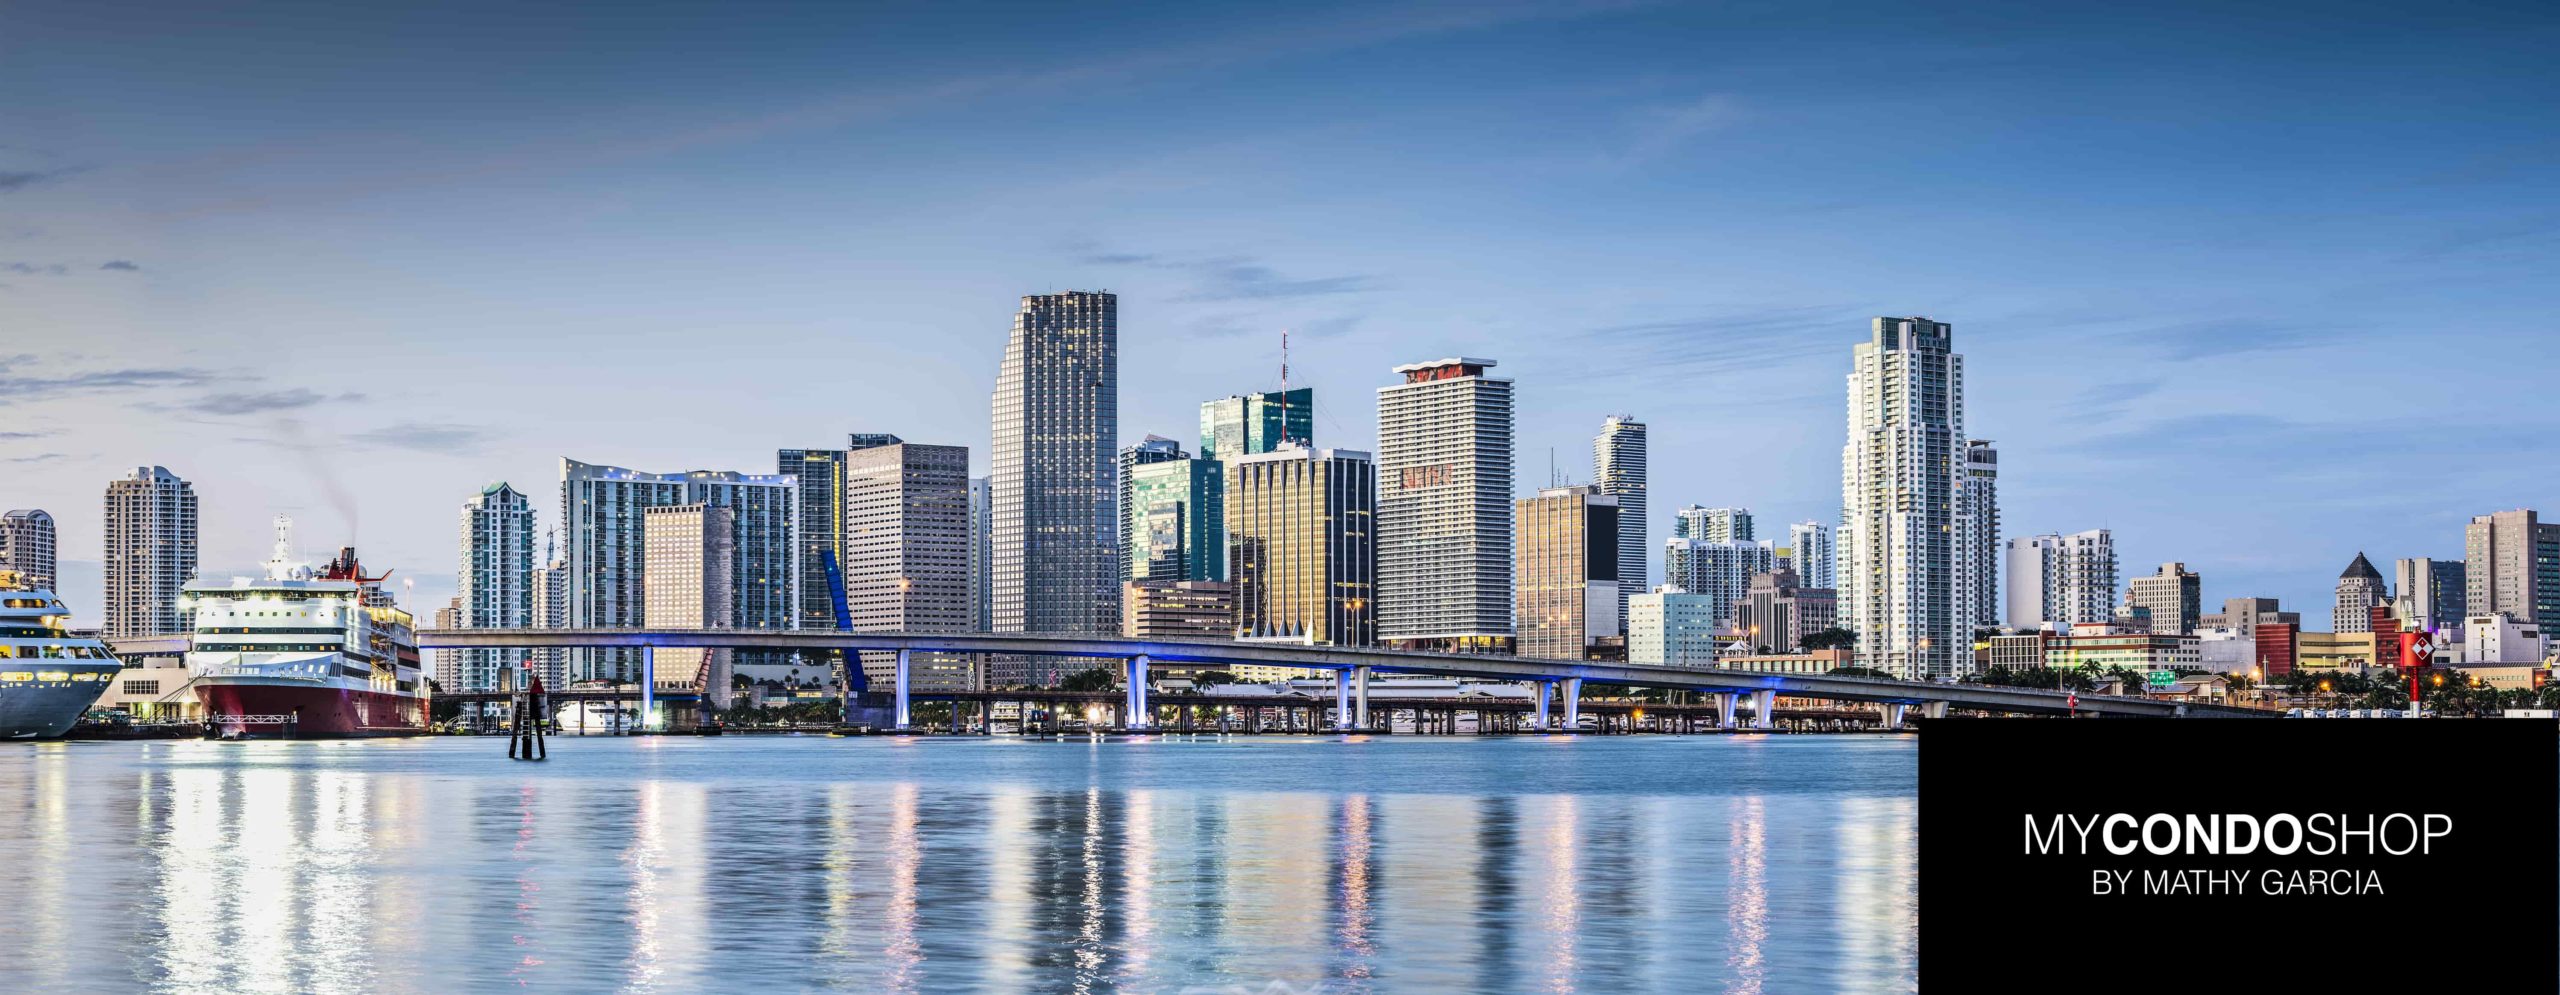 Planning on making real estate investments in Miami? Learn about its history